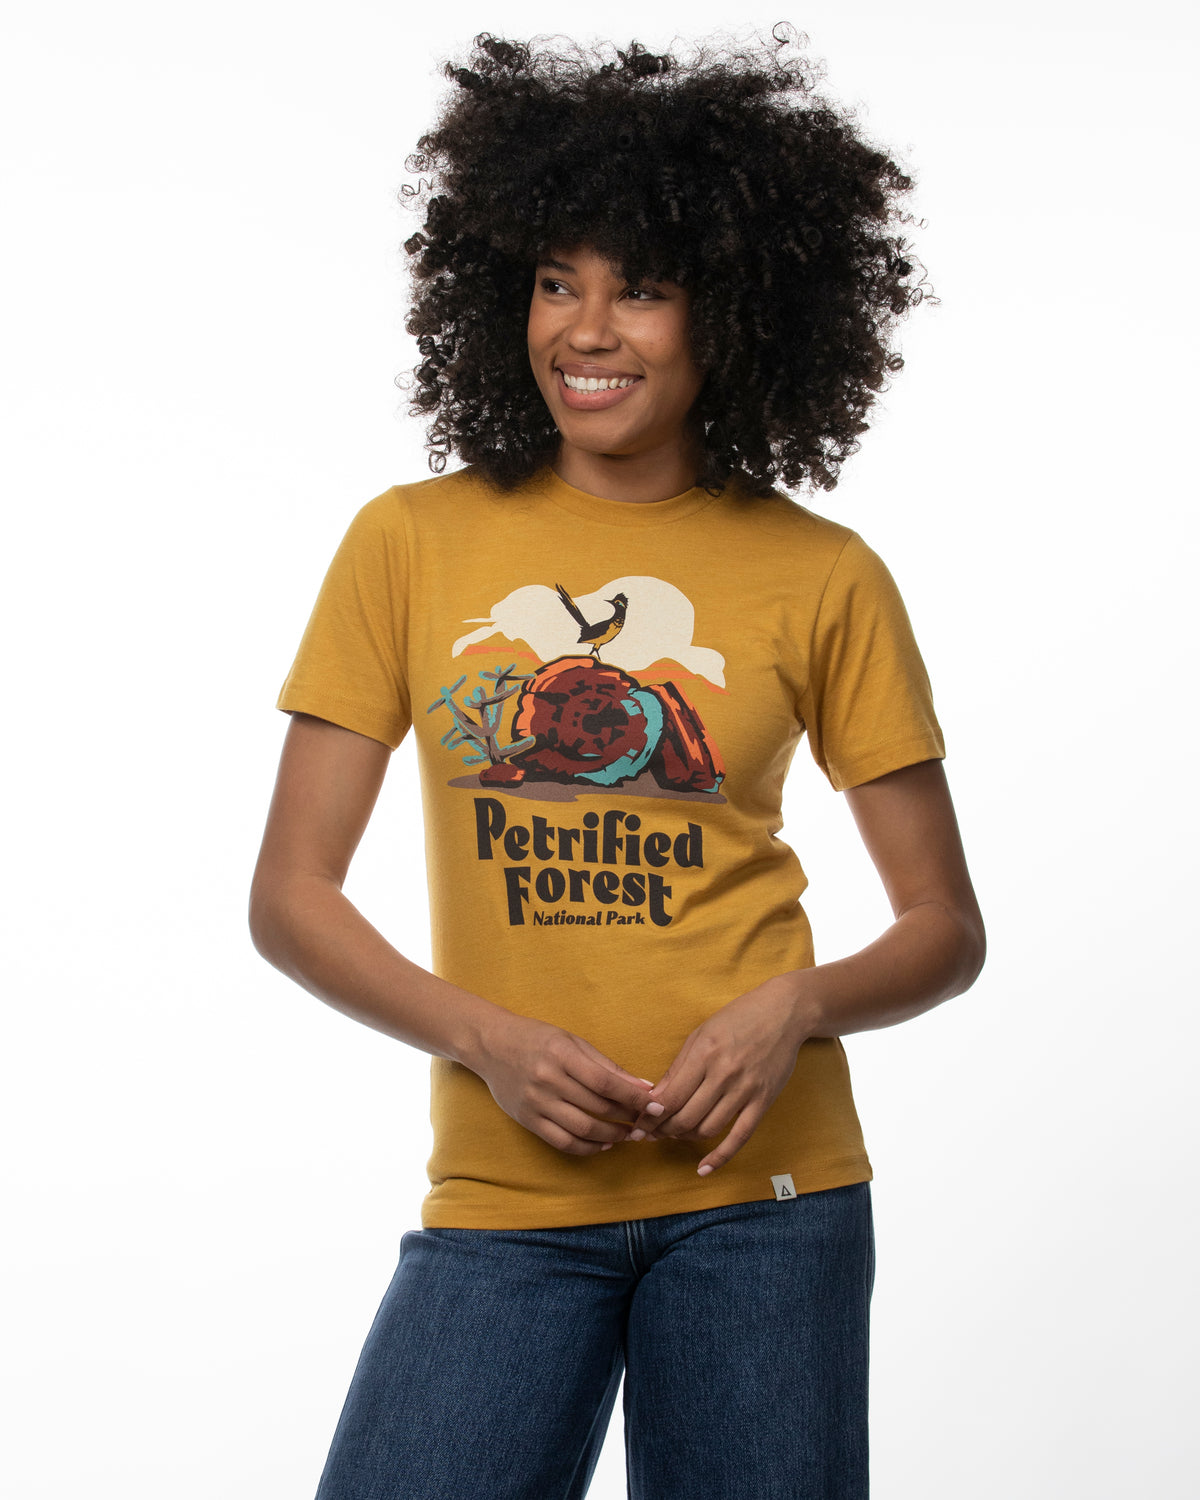 Petrified Forest National Park Tee